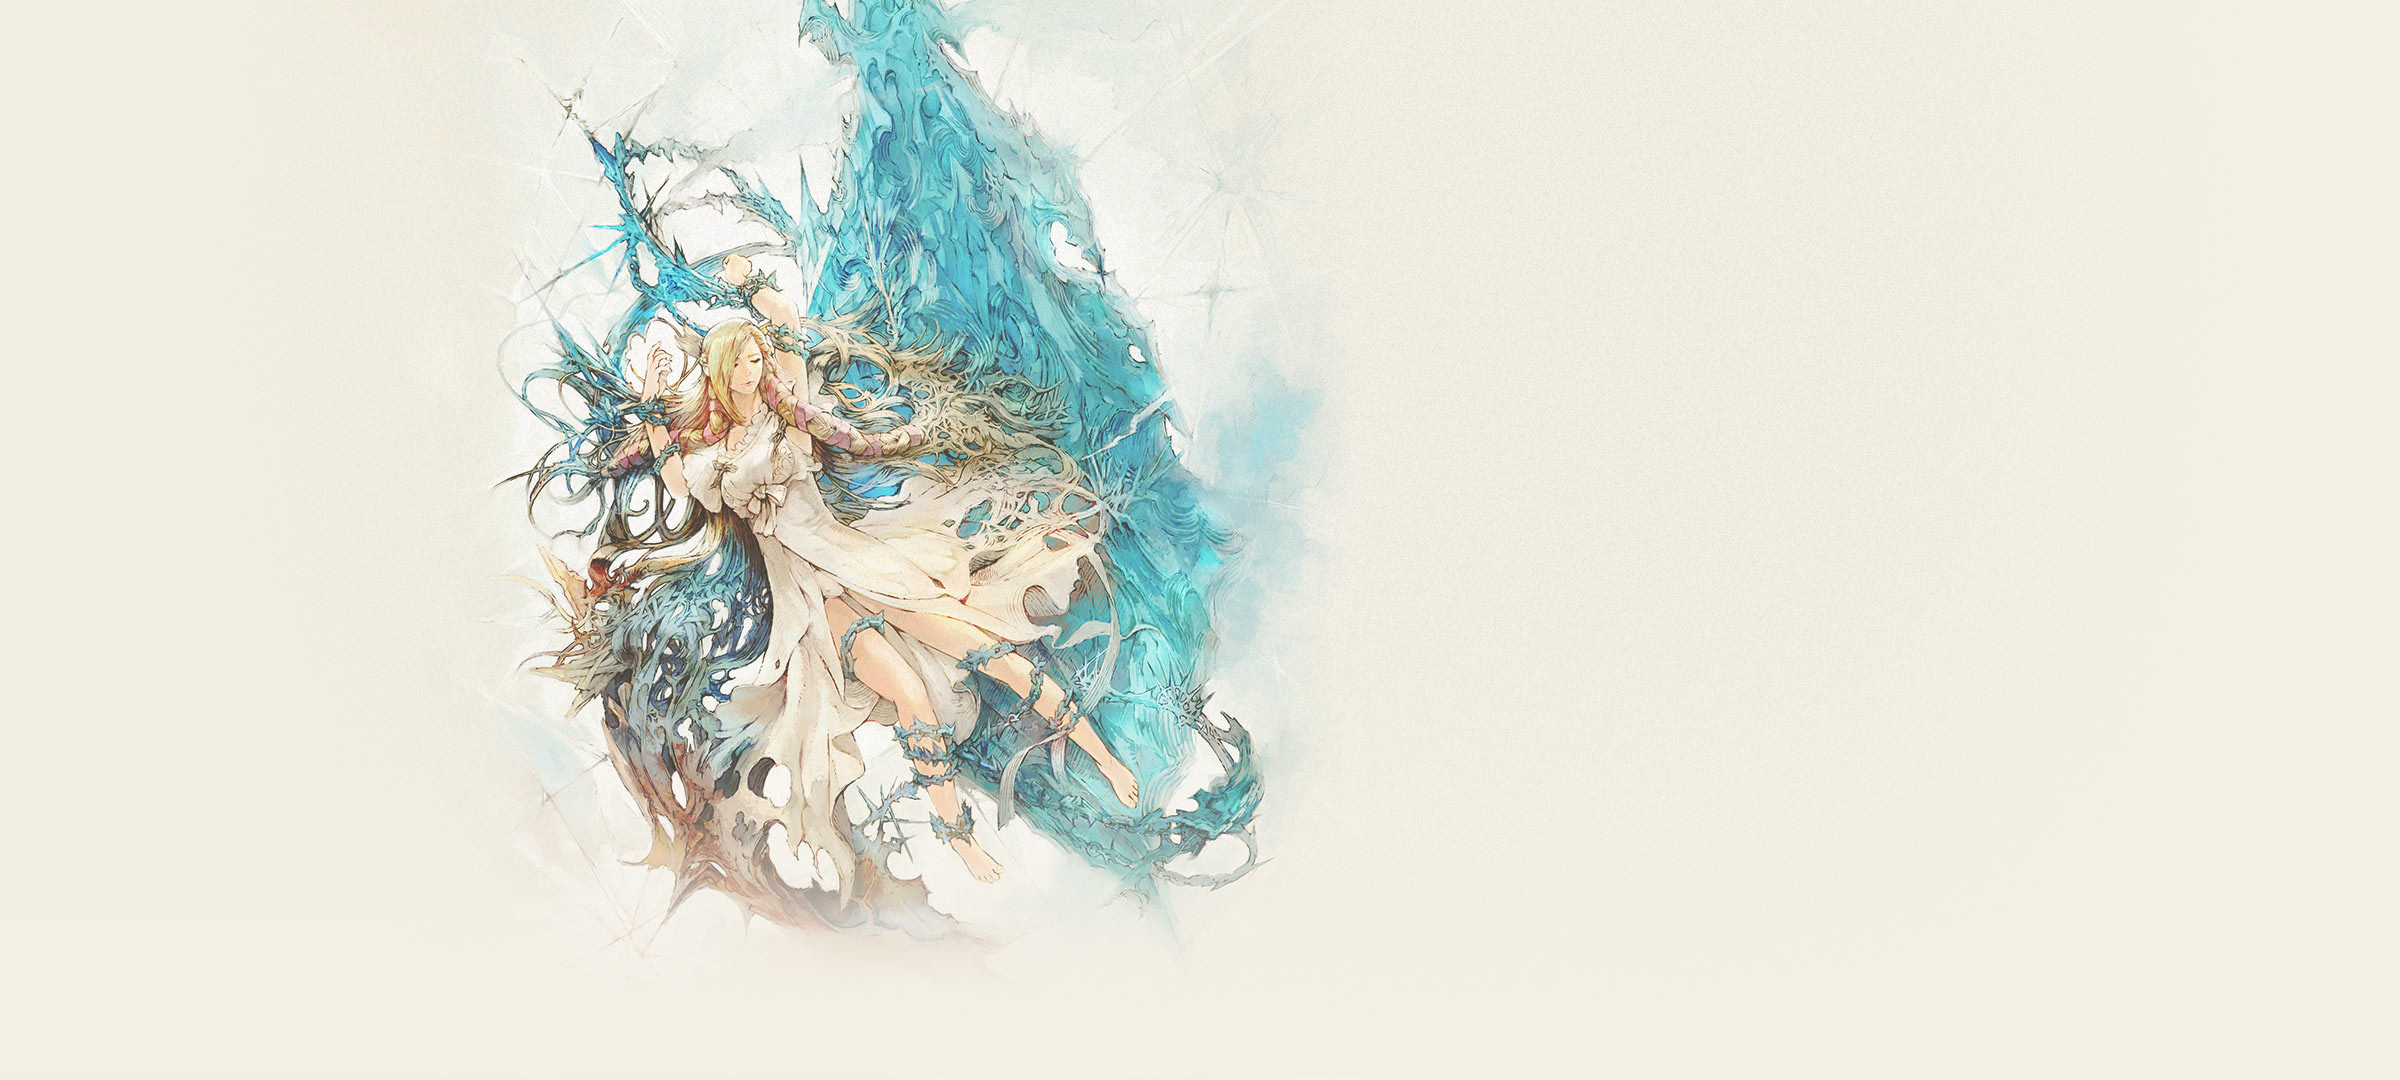 2400x1080 FINAL FANTASY XIV Patch 3.2 - The Gears of Change